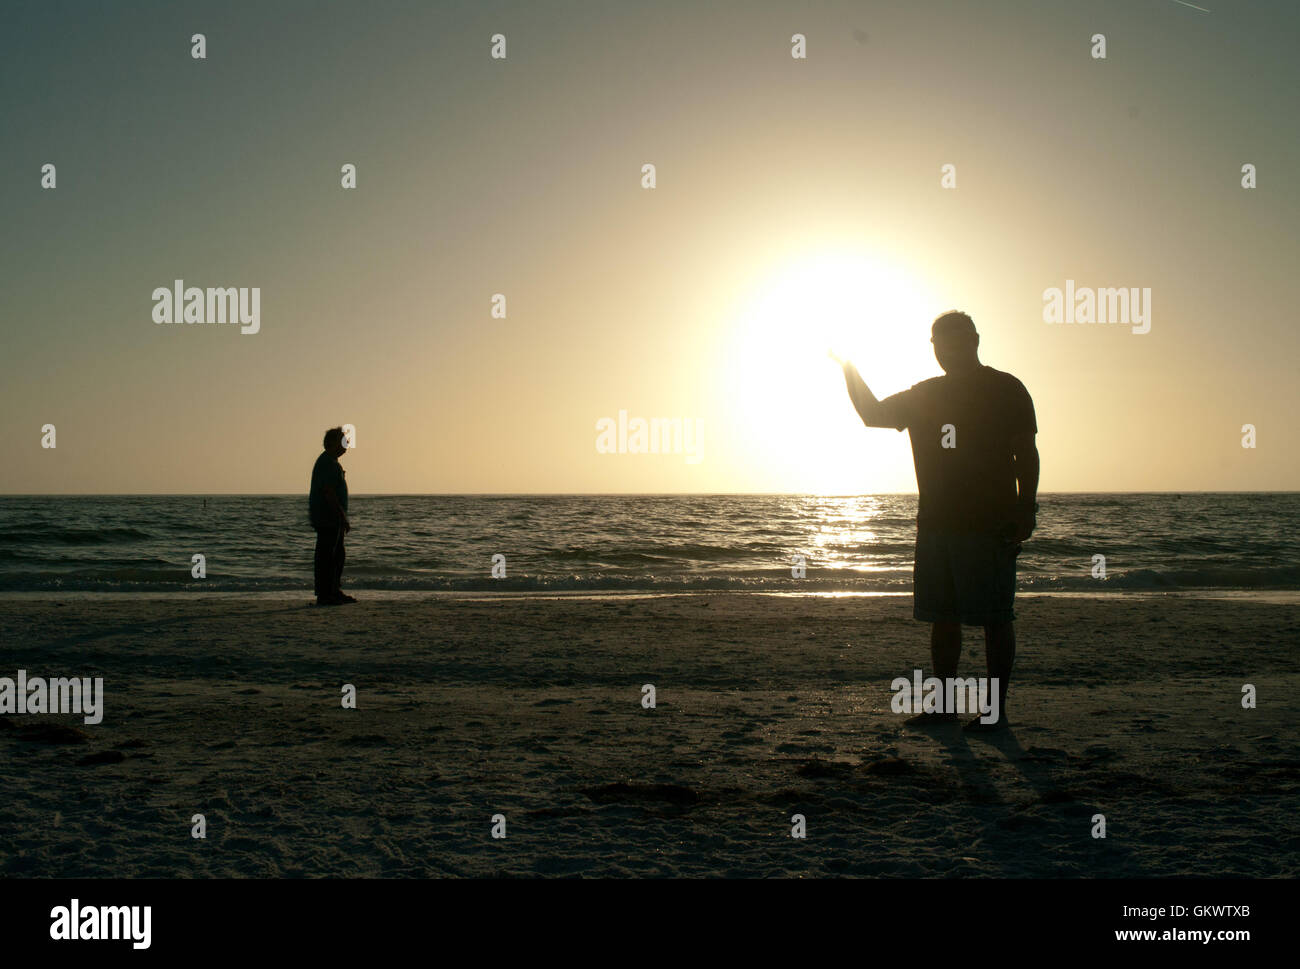 Two men stand at the seashore on the Gulf of Mexico, backlit by the setting sun. Stock Photo